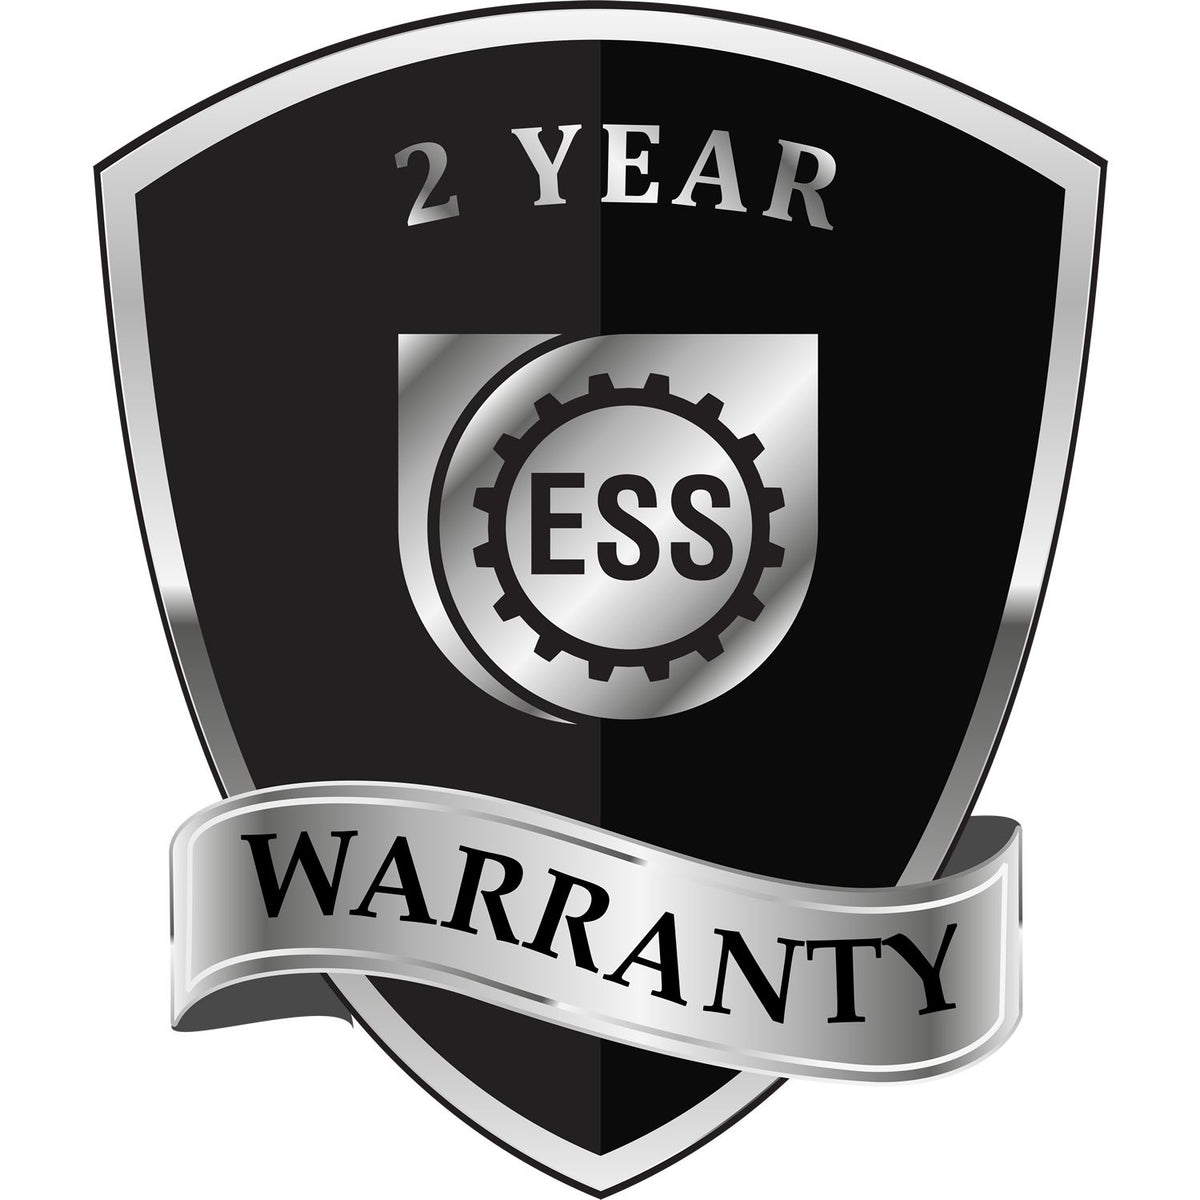 A black and silver badge or emblem showing warranty information for the Gift Missouri Engineer Seal